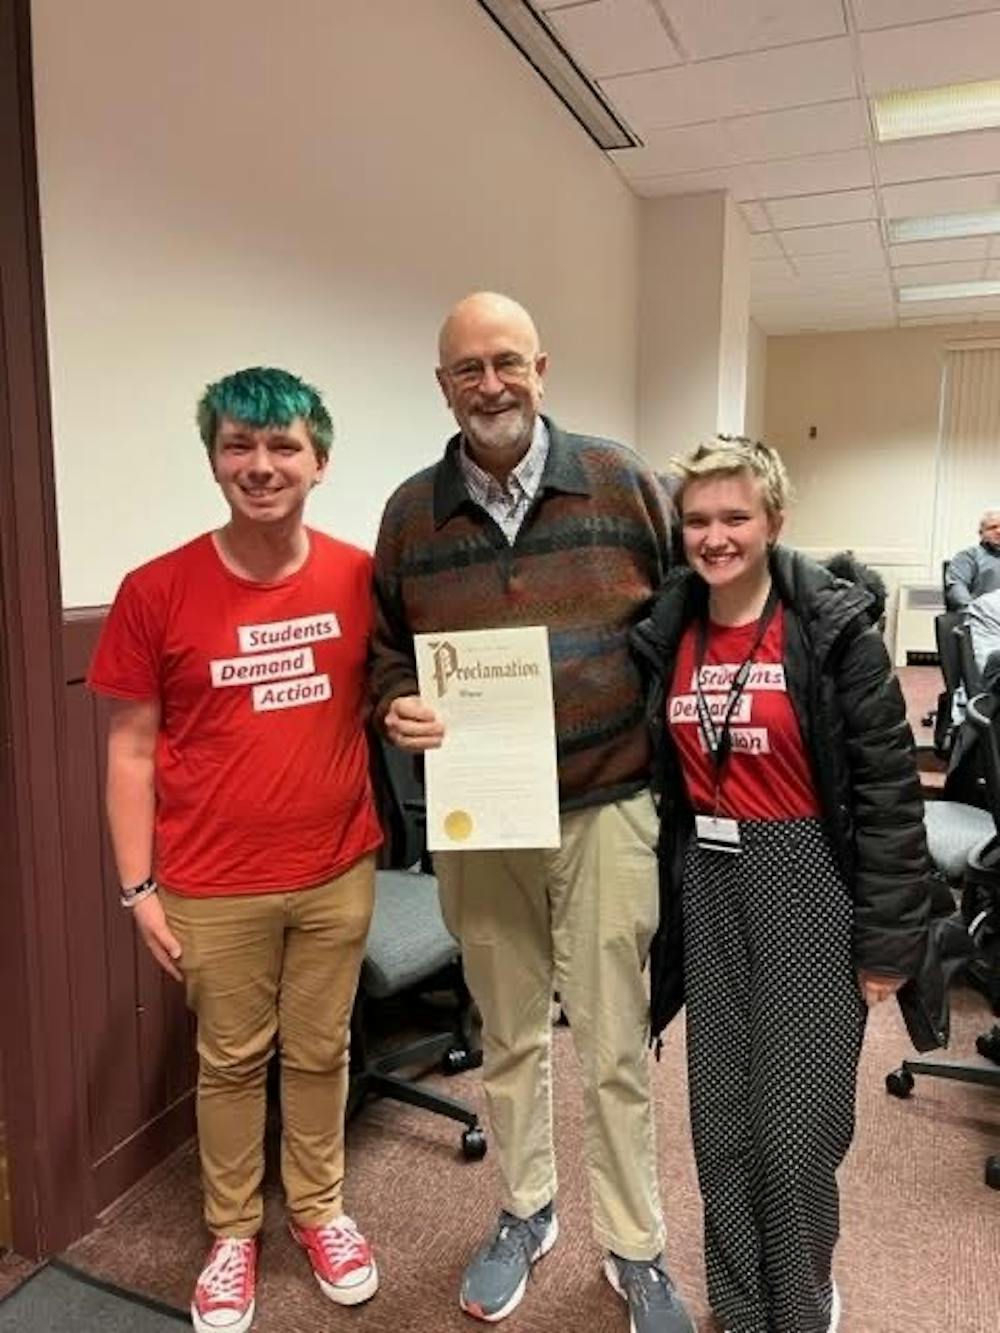 Venus Harvey (left) and Peren Tiemann (right) stand with Mayor William Snavely, who is holding the proclamation to declare June 2 as National Gun Violence Awareness Day in Oxford.